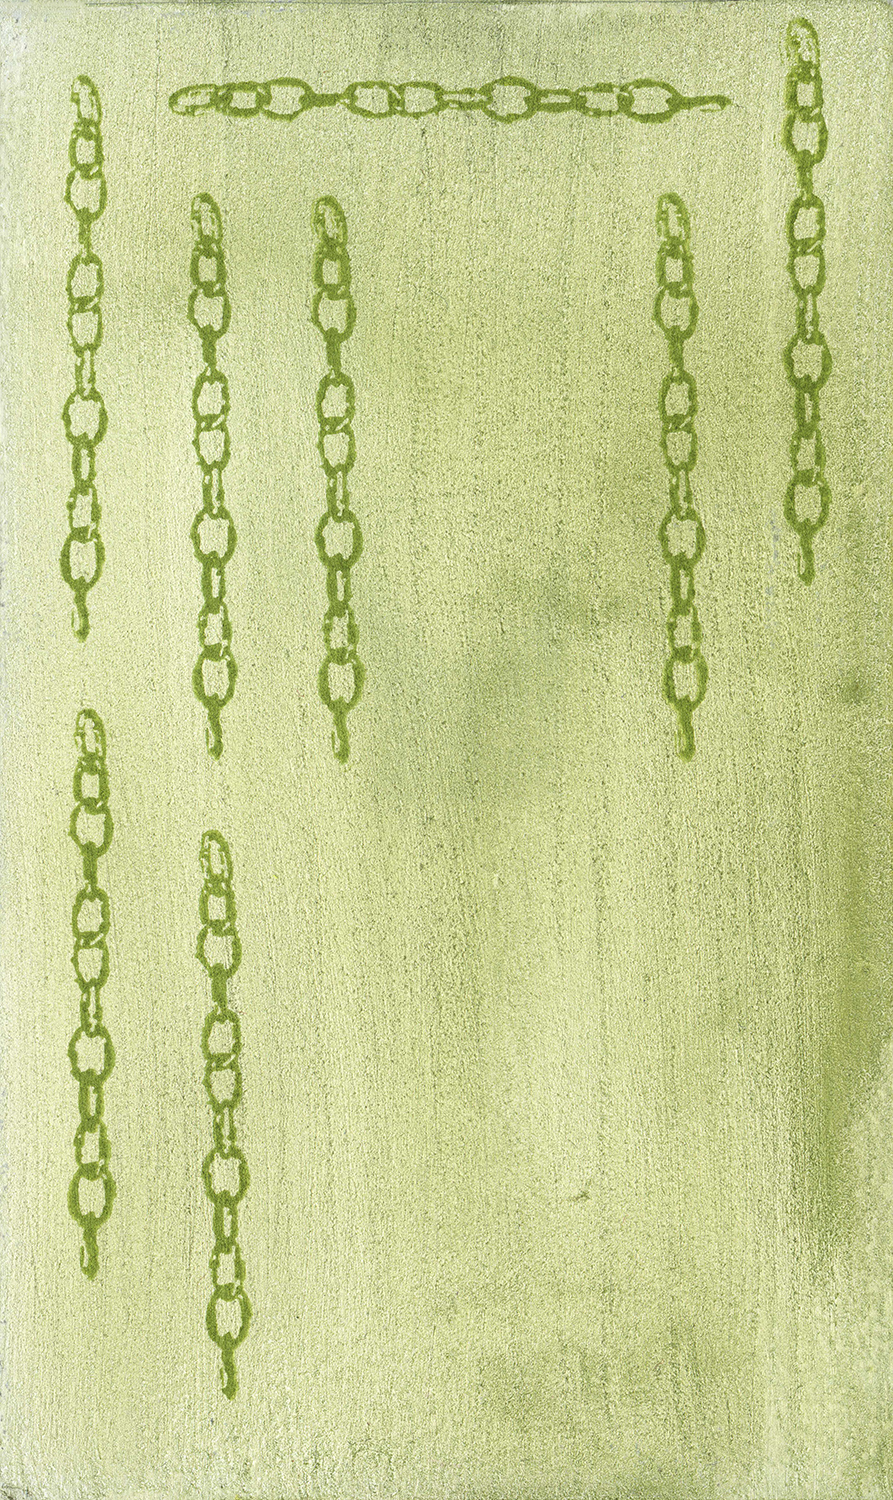 pieces of chain on olive ground